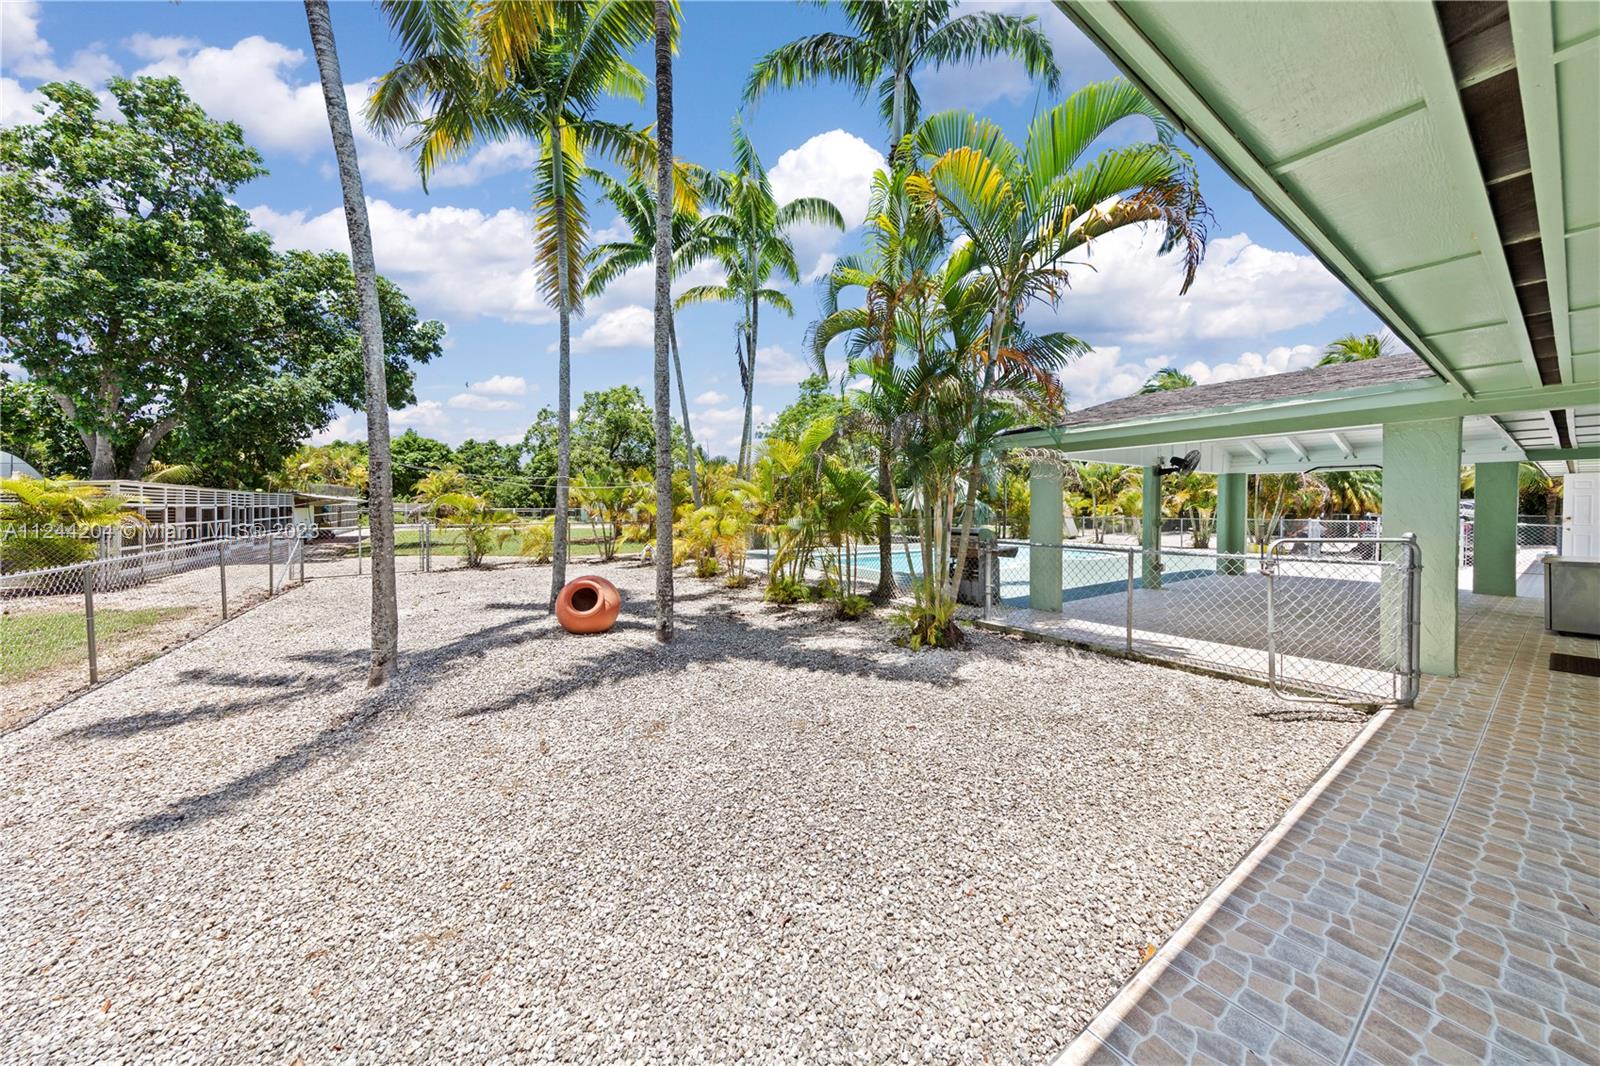 LOW MAINTENANCE WITH WALKWAYS AROUND THE HOUSE. THIS WALKWAY  LEADS TO CABANA BATH